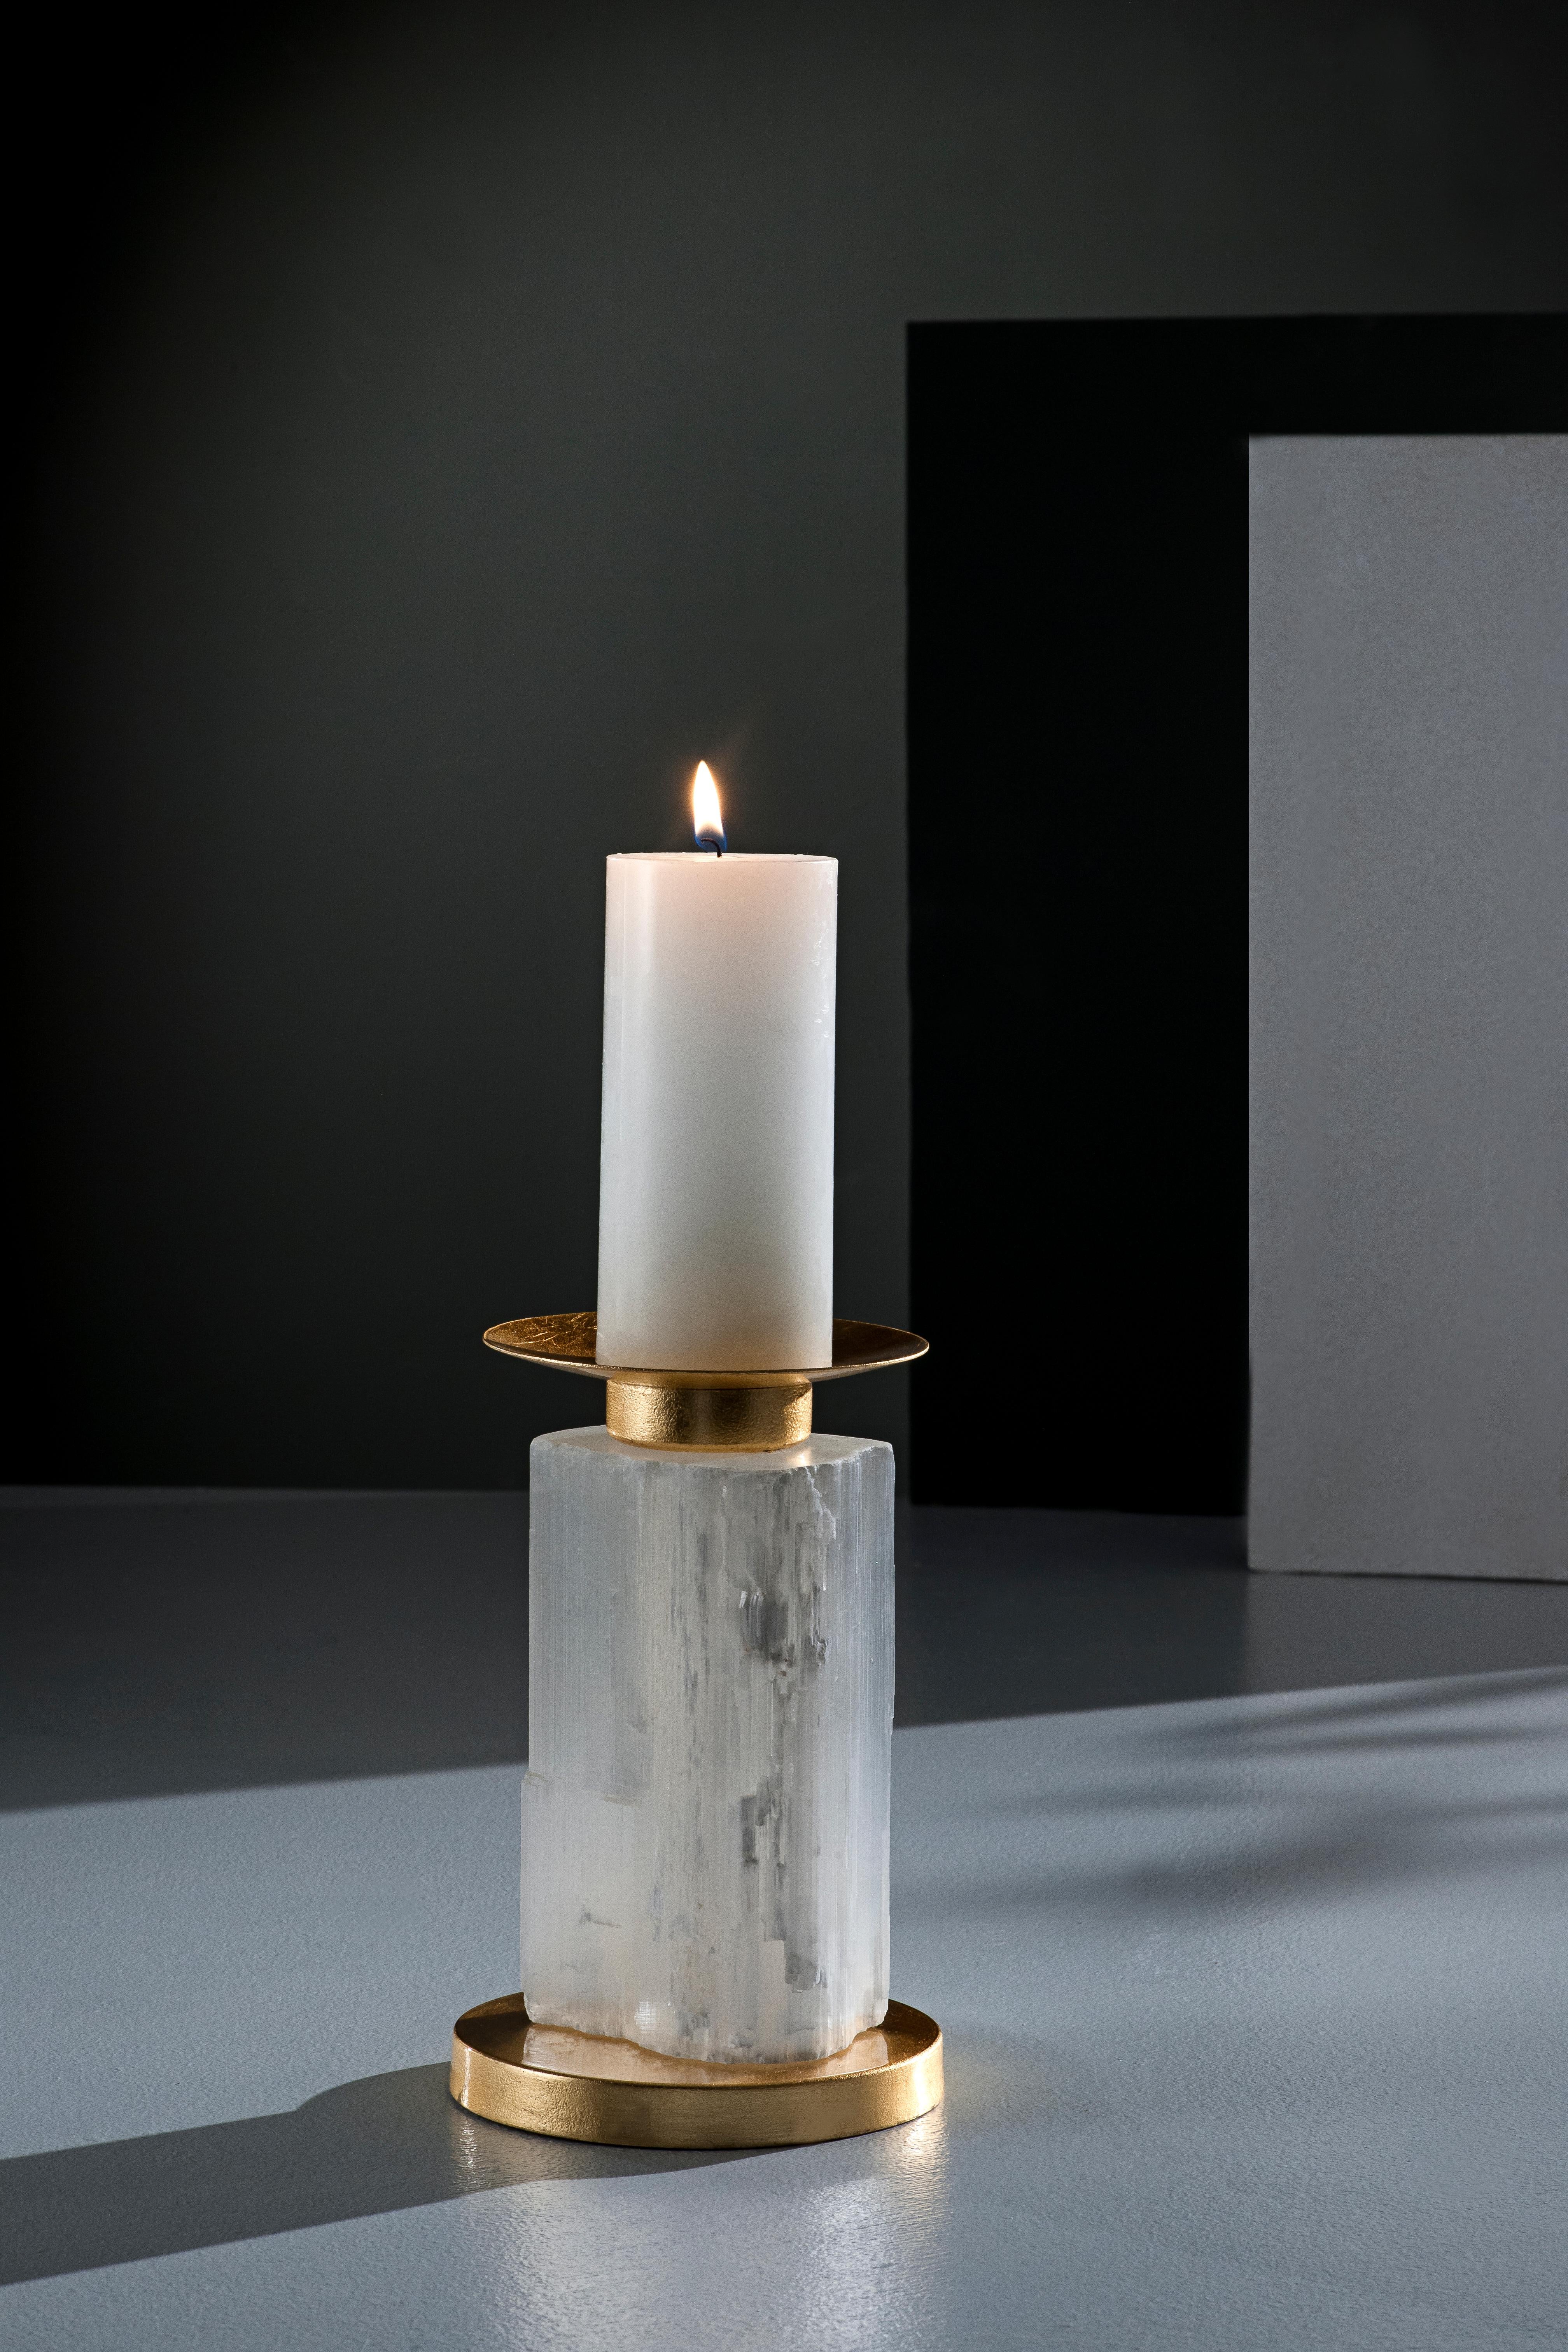 Selenite candle holder by Aver
Dimensions: D 14 x H 20 cm
Materials: Selenite, steel.
  